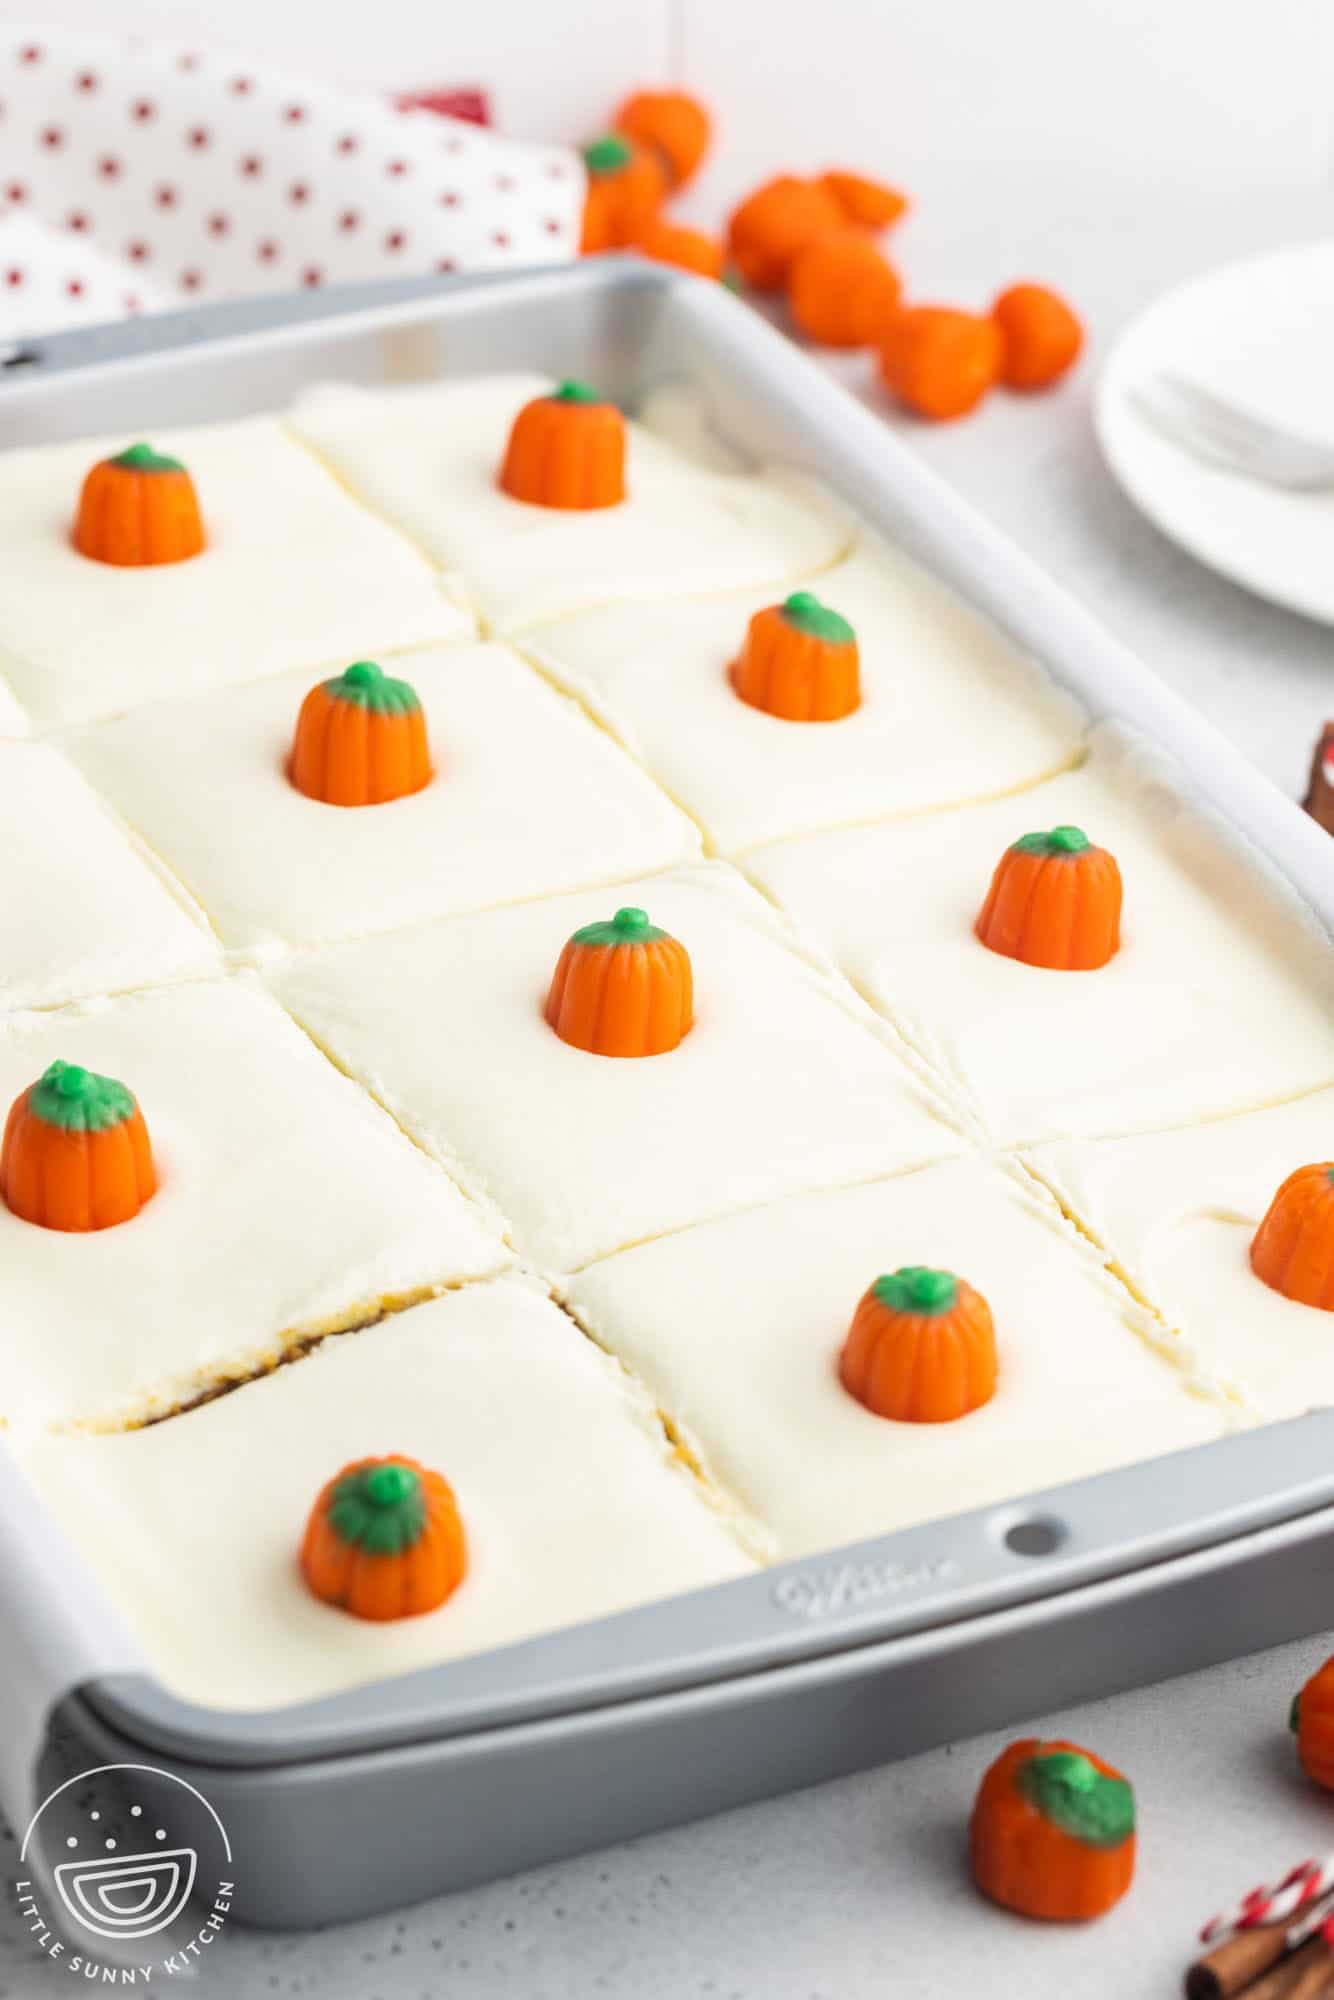 a 9x13 pan of cake, sliced into squares. The cake is frosted and each piece is topped with a candy corn pumpkin.